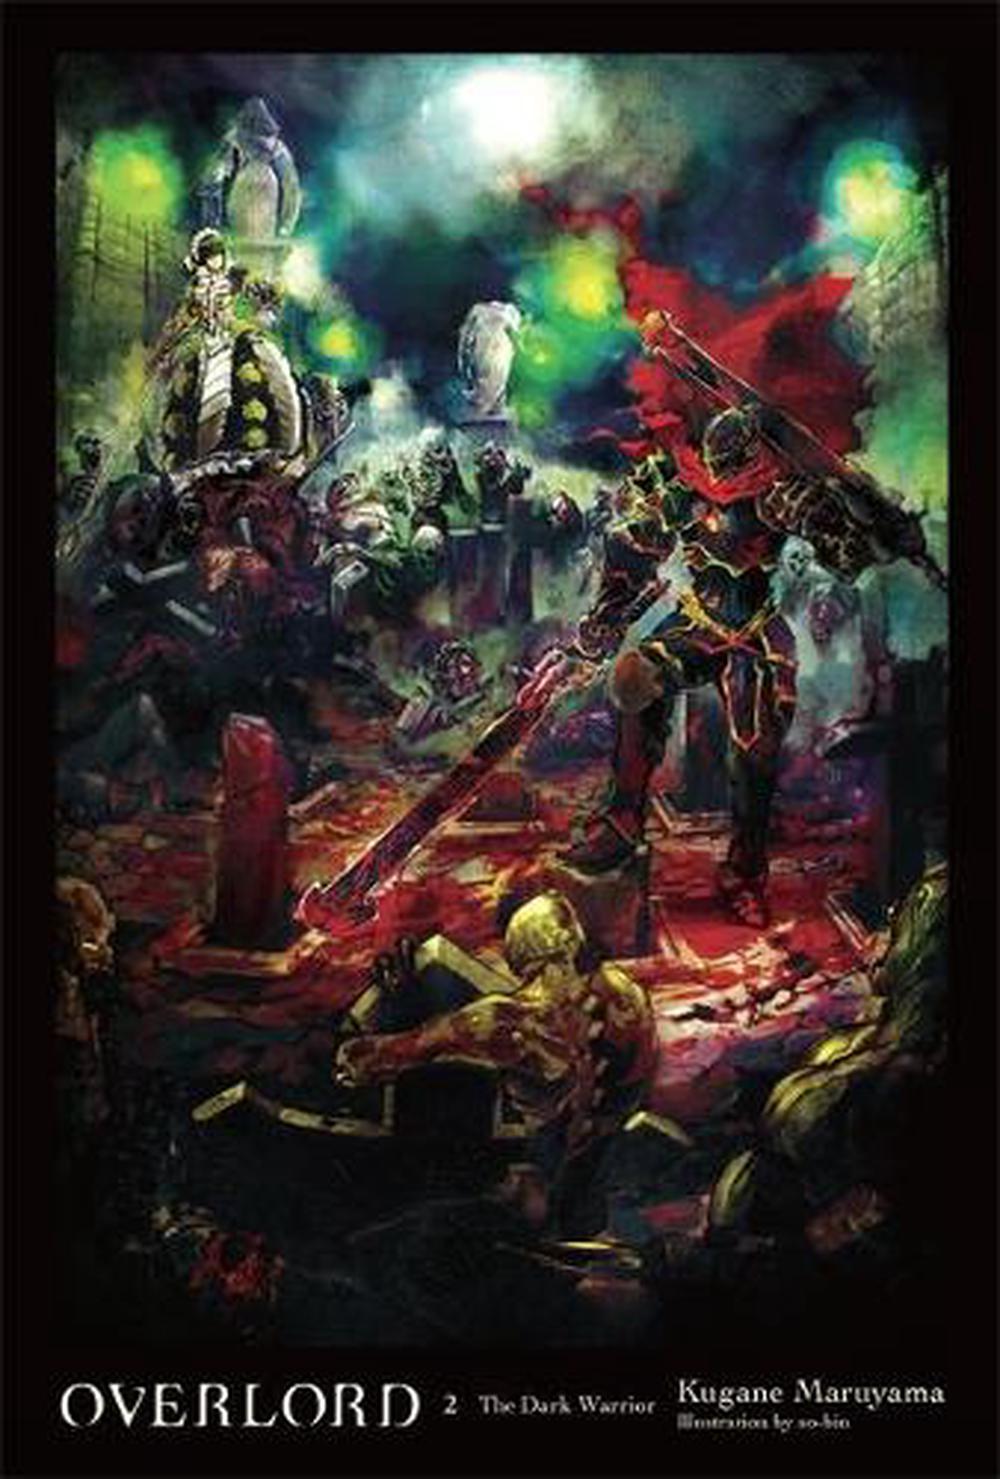 Overlord Vol 2 By Kugane Maruyama Hardcover Buy Online At The Nile